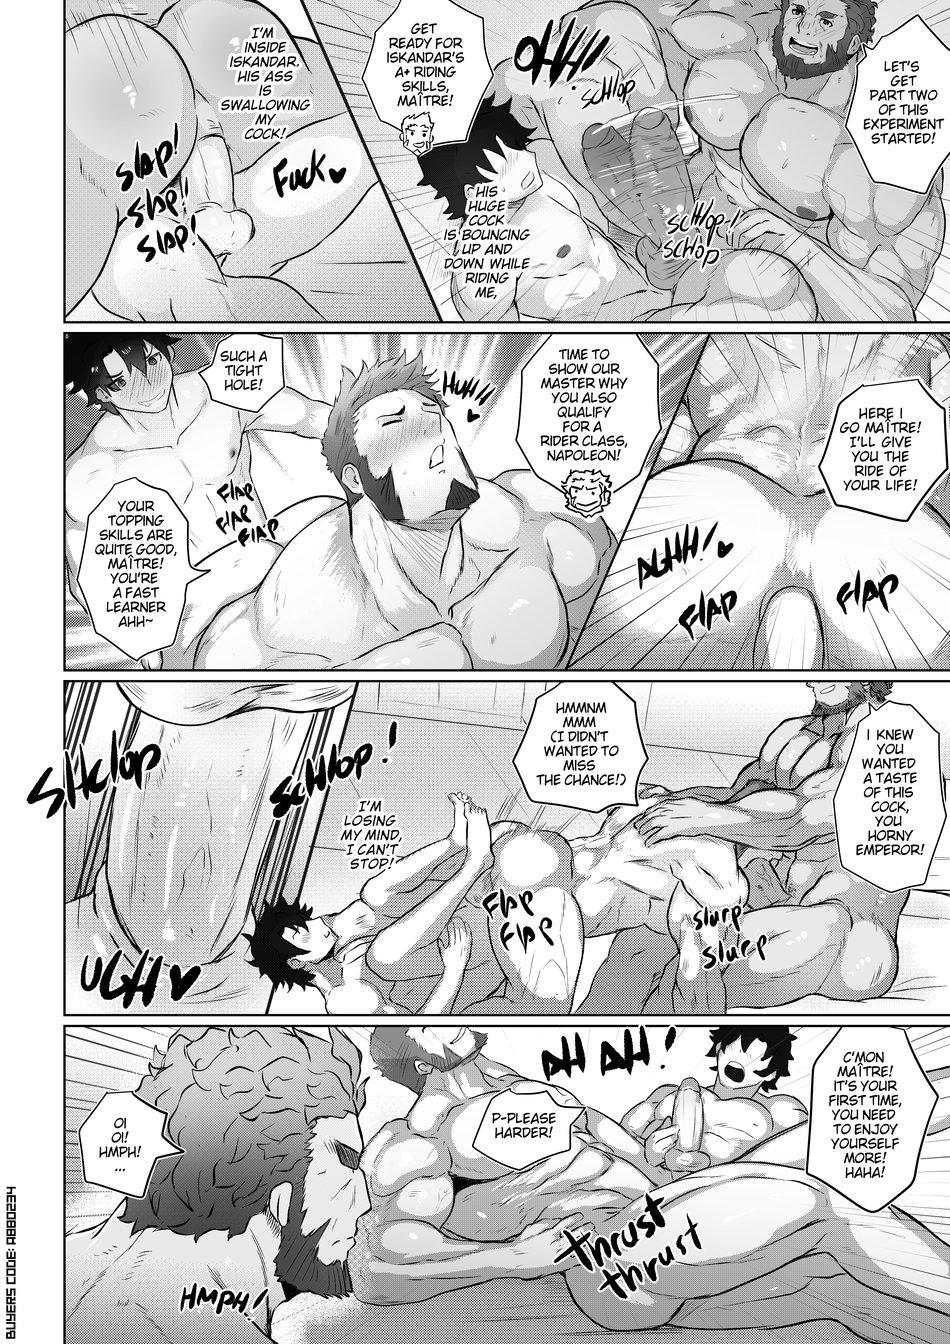 Softcore Triple Threat - Fate Grand Order - Fate grand order Boy - Page 9